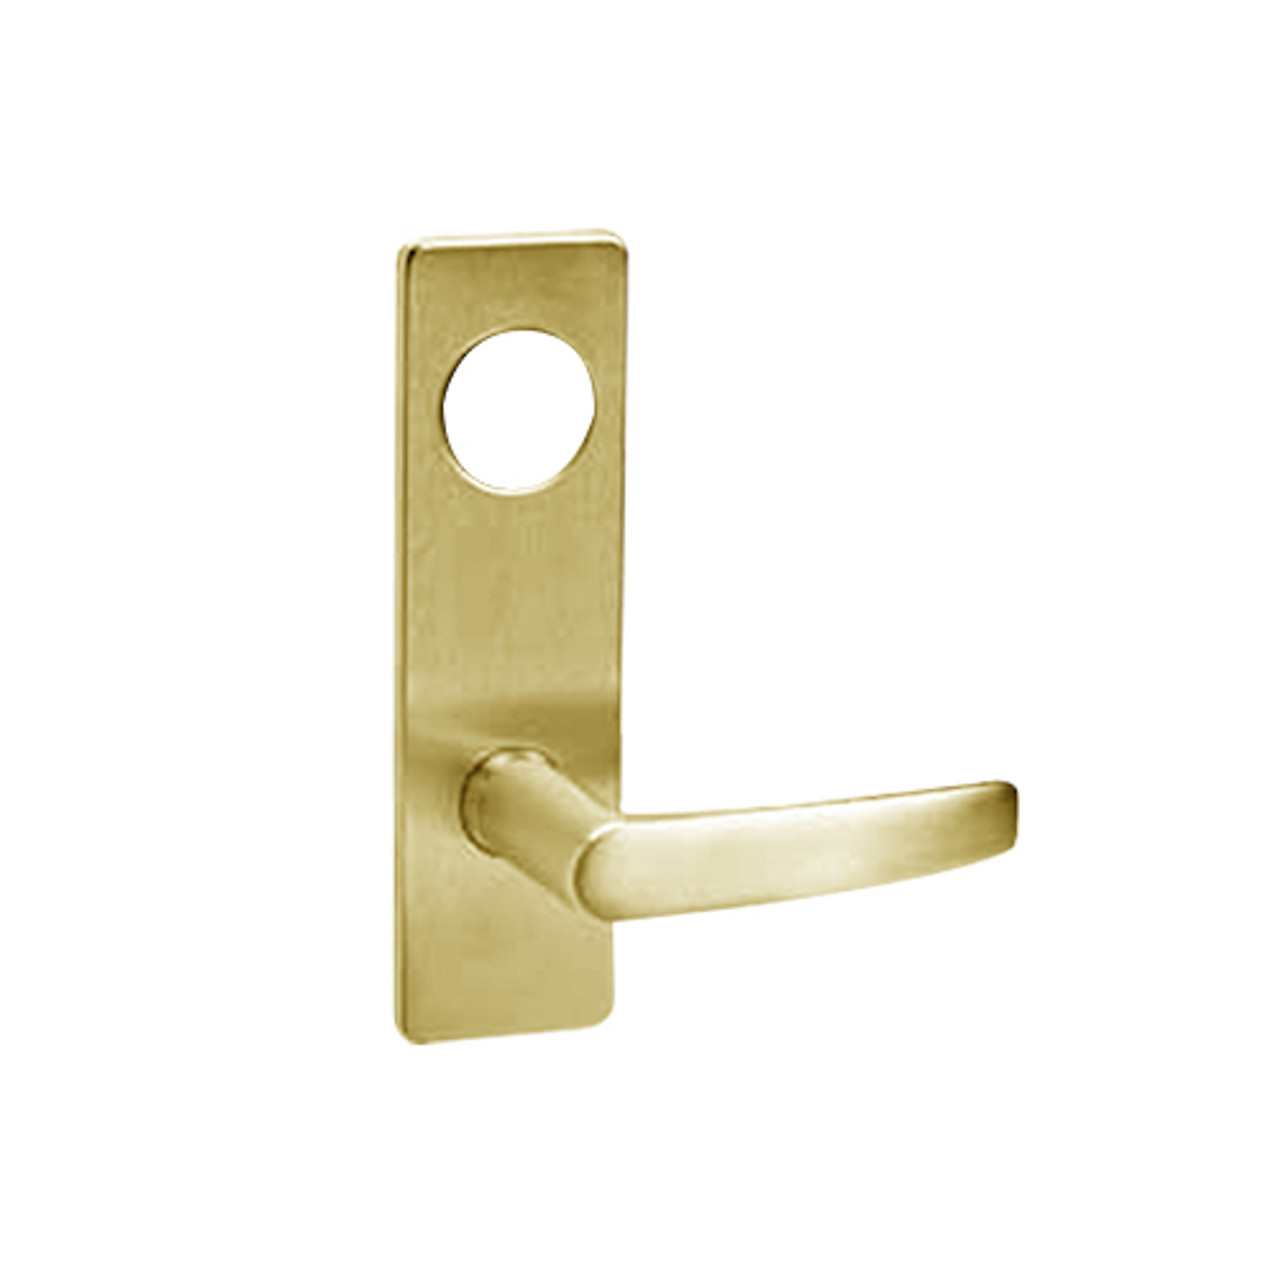 ML2058-ASP-605-LC Corbin Russwin ML2000 Series Mortise Entrance Holdback Locksets with Armstrong Lever in Bright Brass